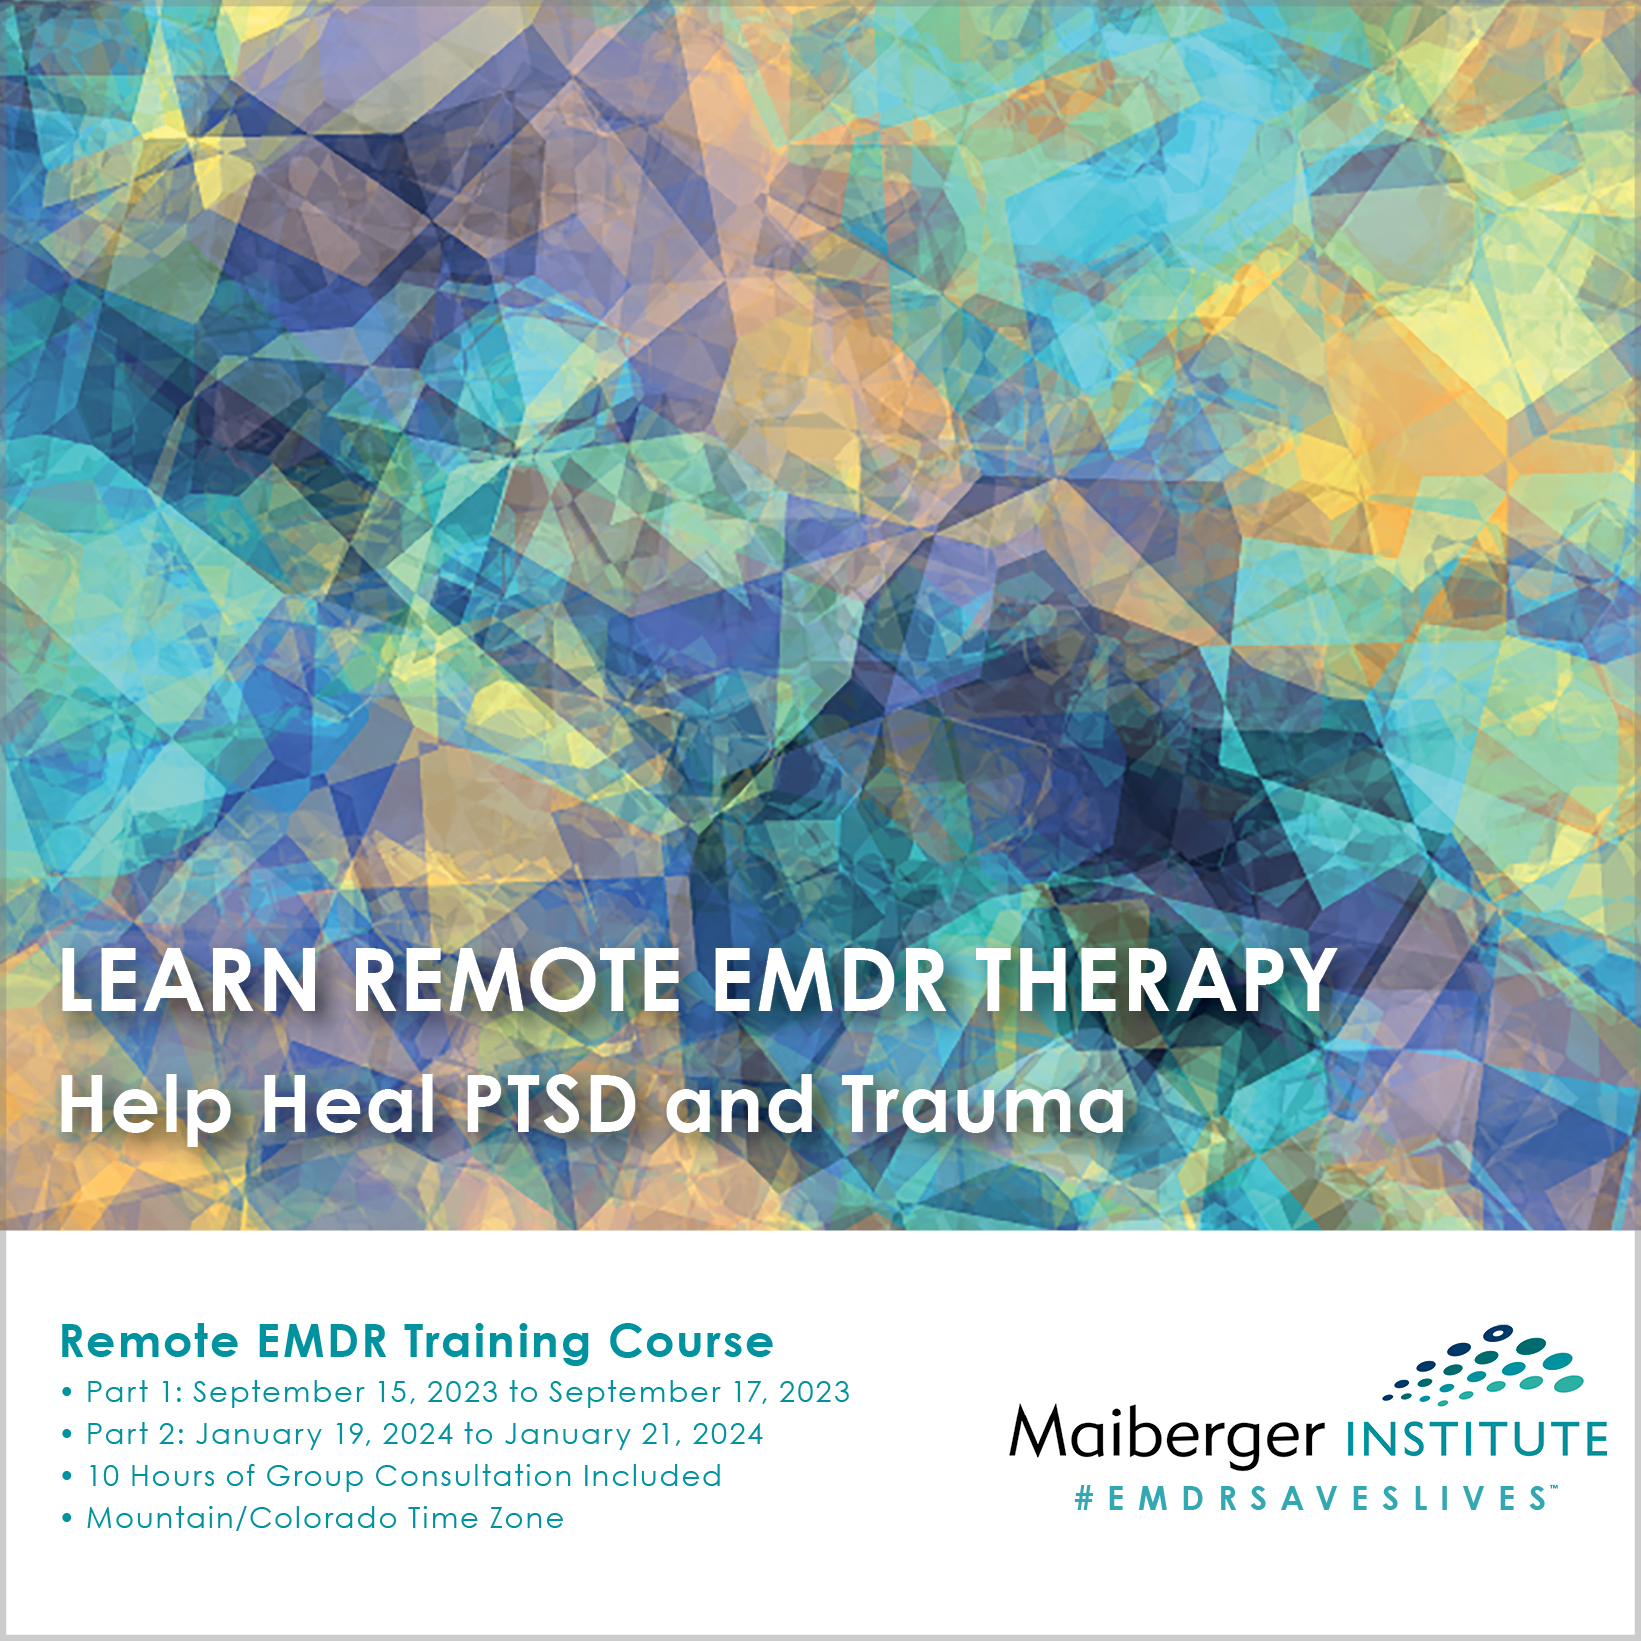 Complete Remote EMDR Training Course Part 1 September 15, 2023 to